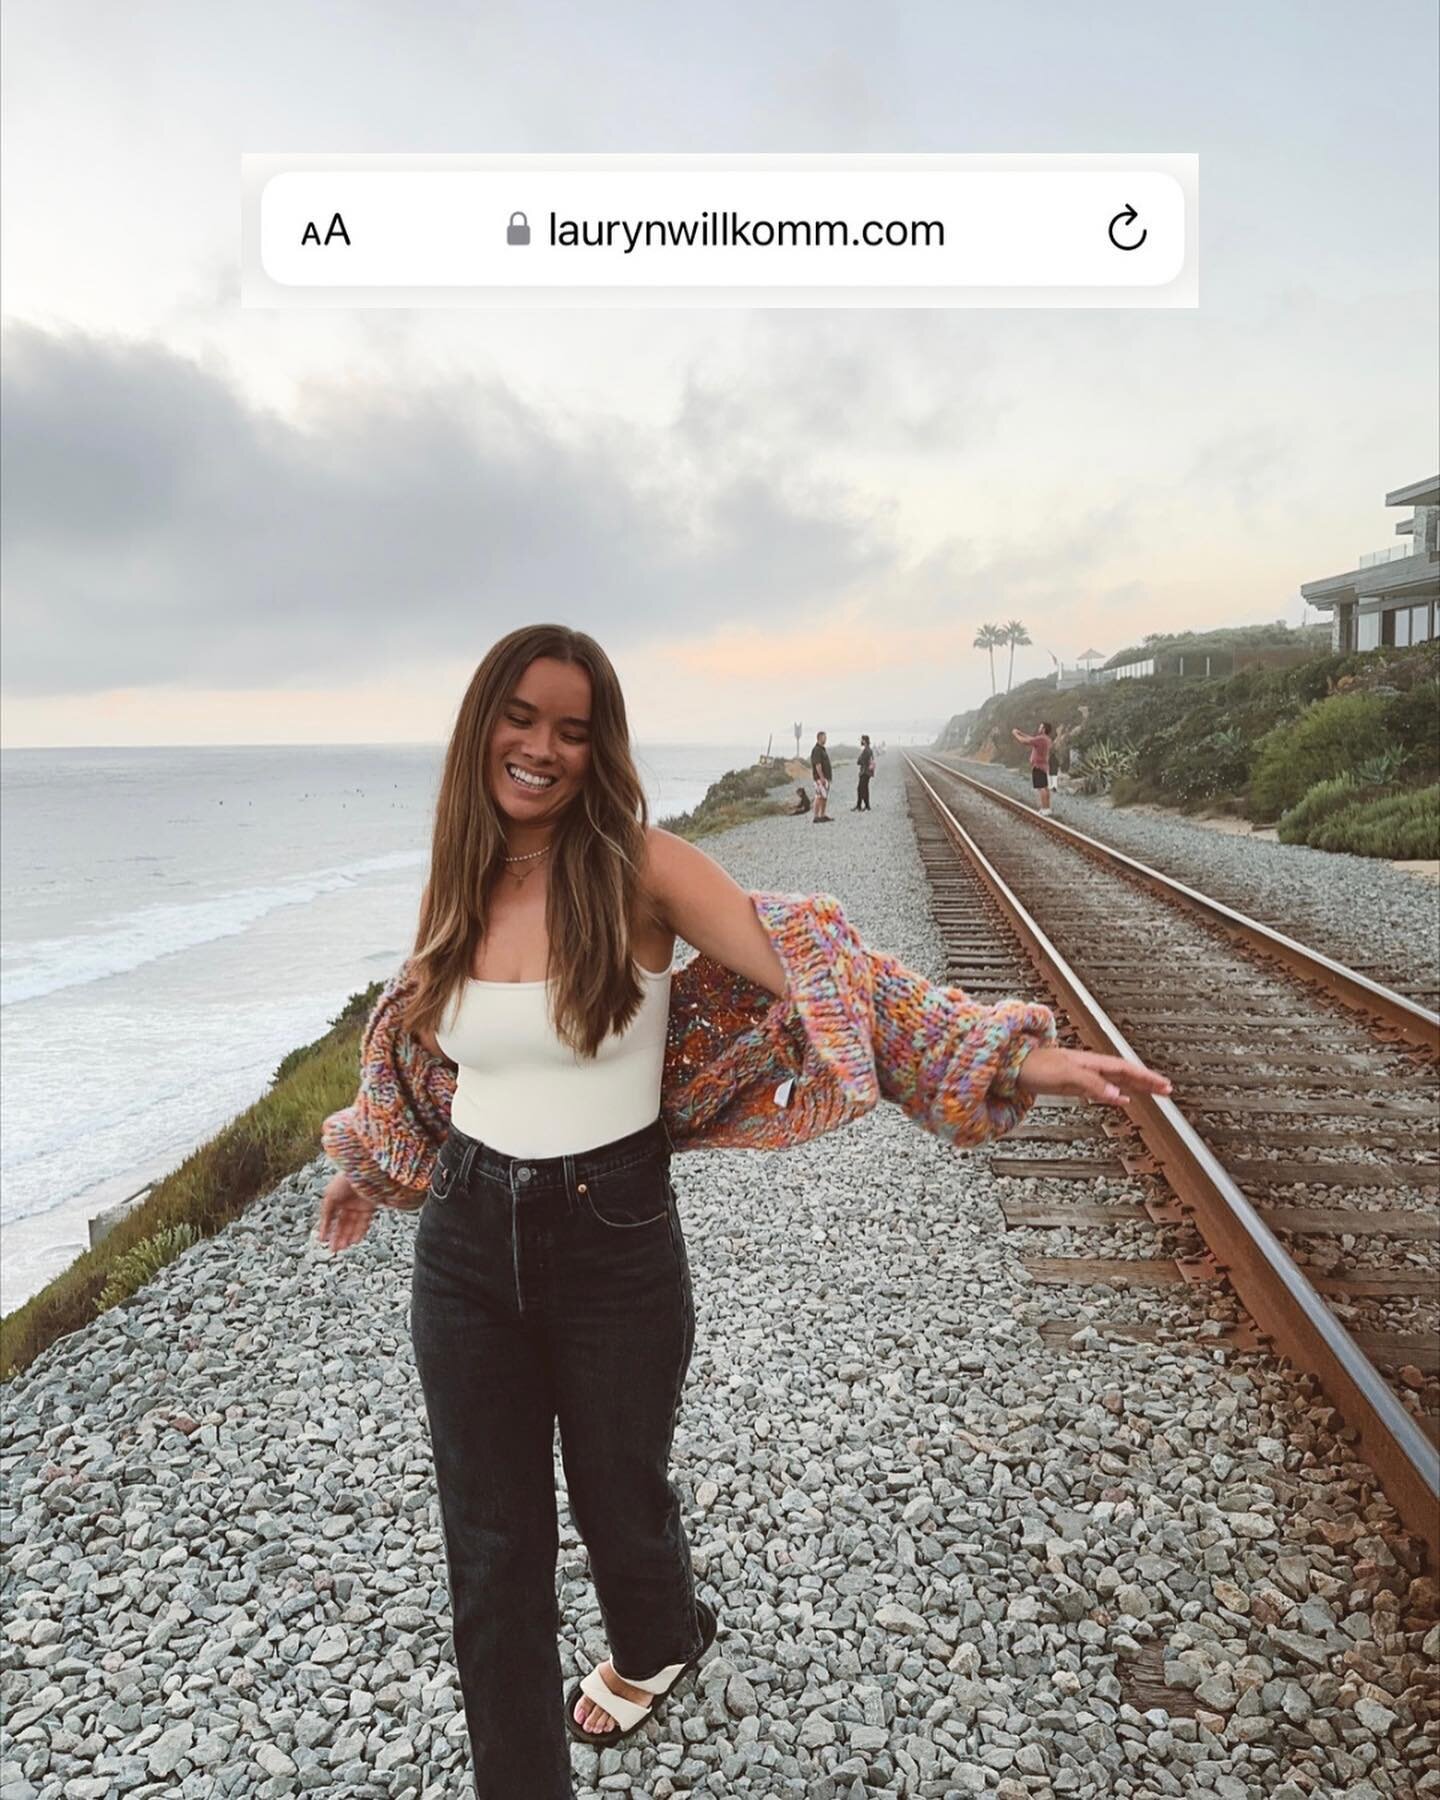 guess what!!! laurynwillkomm.com is live 🥳 this is my own new fun creative space where you can find all my social links, favorite items, and *cough cough* shop products COMING SOON🤫